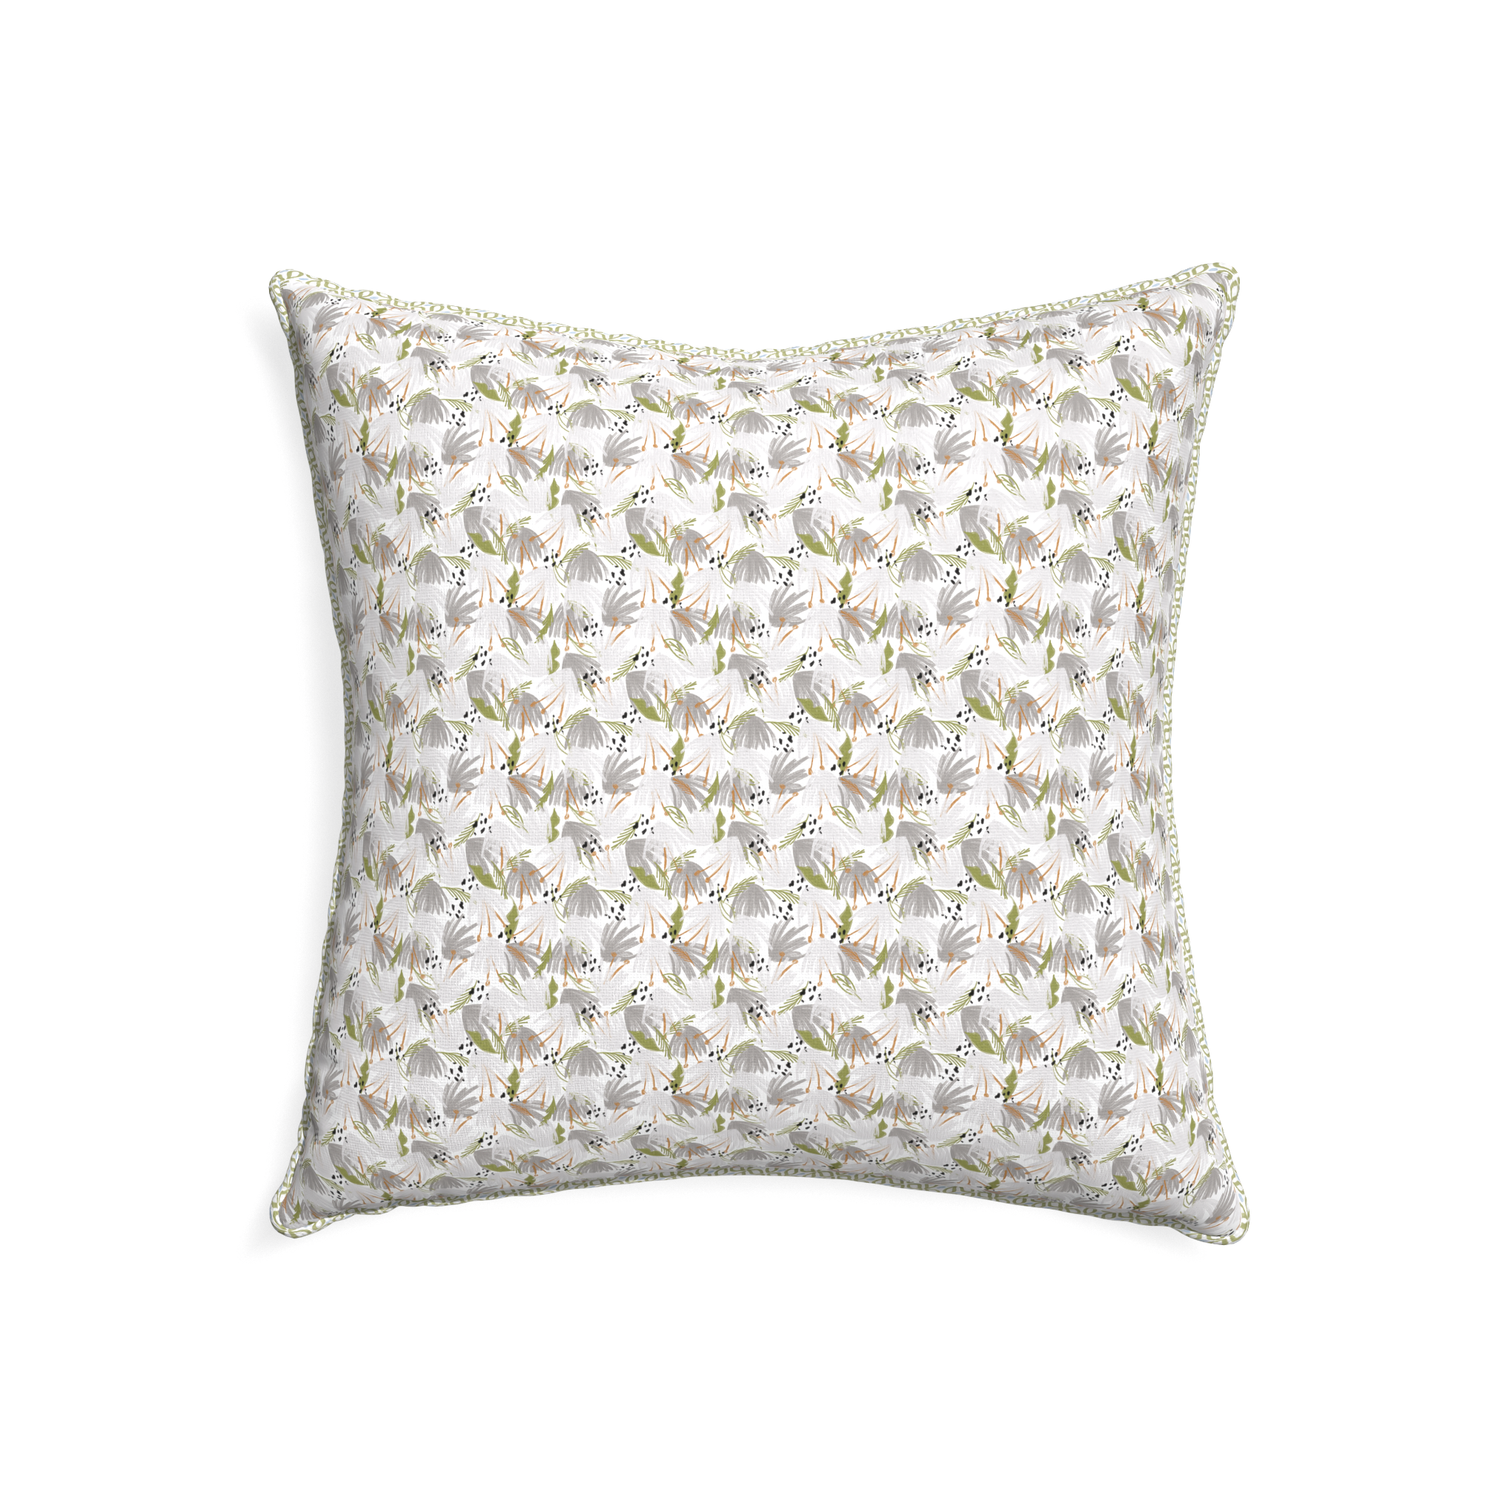 22-square eden grey custom grey floralpillow with l piping on white background